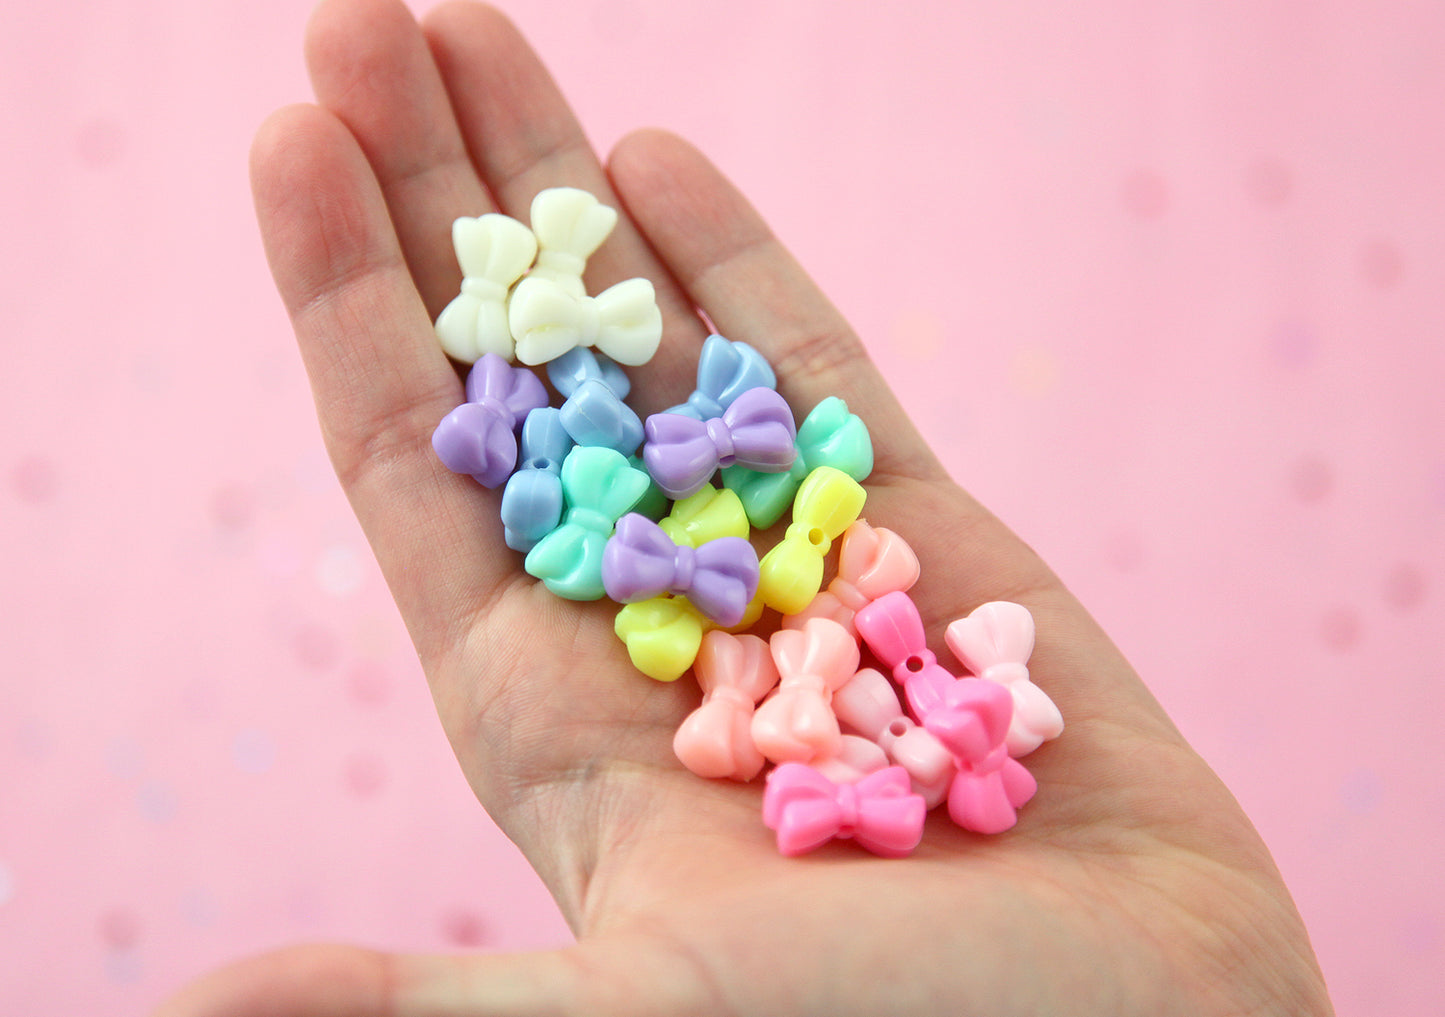 Pastel Beads - 18mm Beautiful Bright Small Cute Bow or Ribbon Shape Plastic Acrylic or Resin Beads - 80 pc set